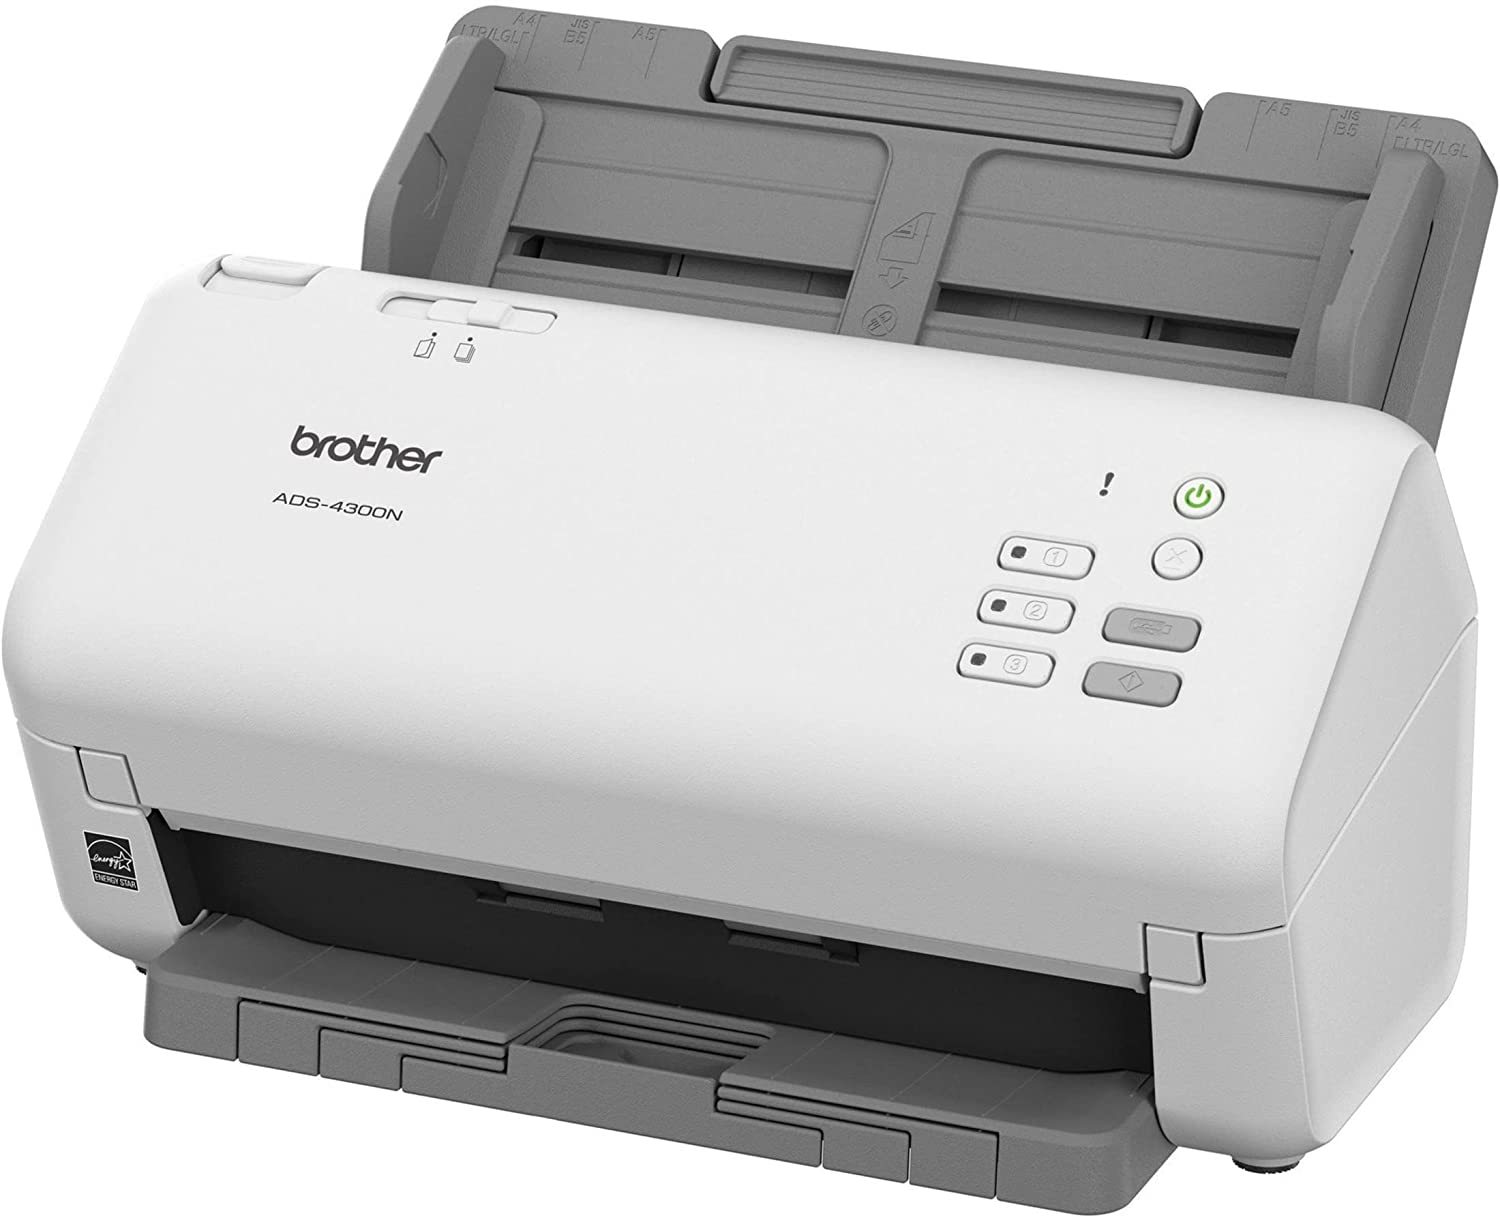 Primary image for Professional Desktop Scanner From Brother With Networking, Duplex, And Quick